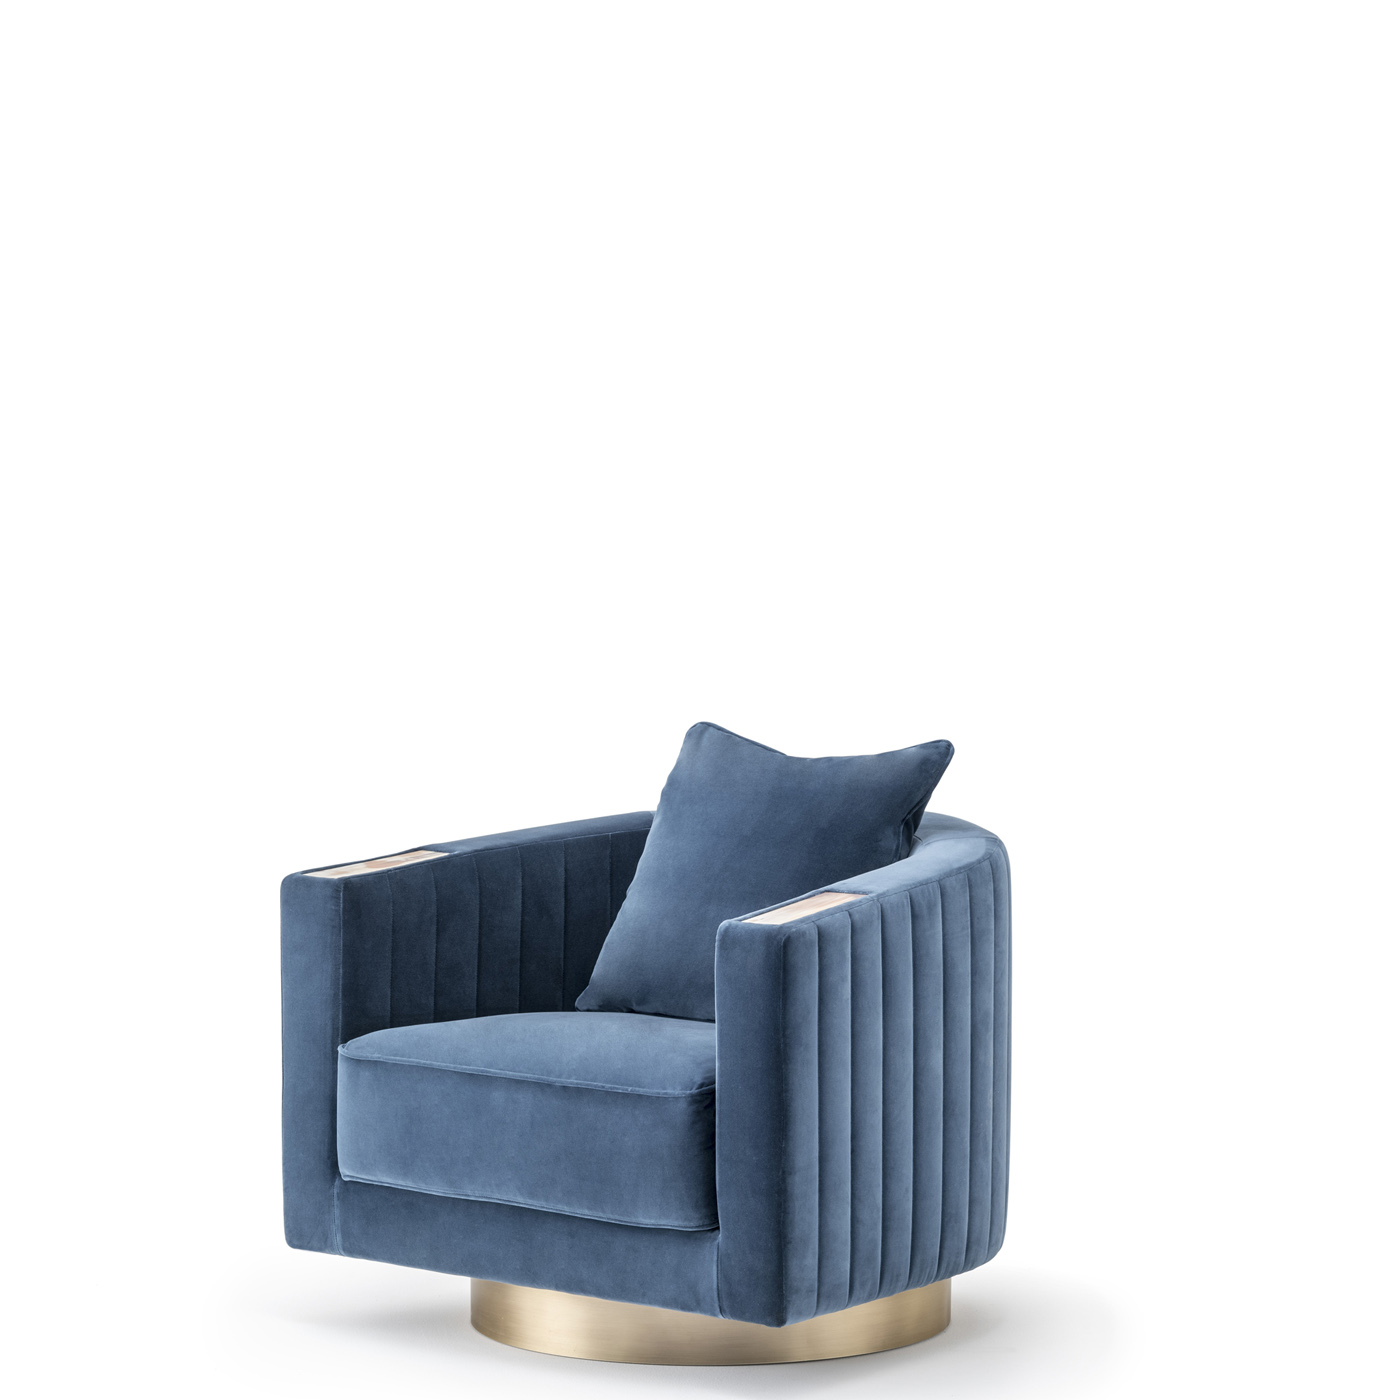 Sofas and seats - Rachele armchair with details in horn mod. 6040D - Arcahorn